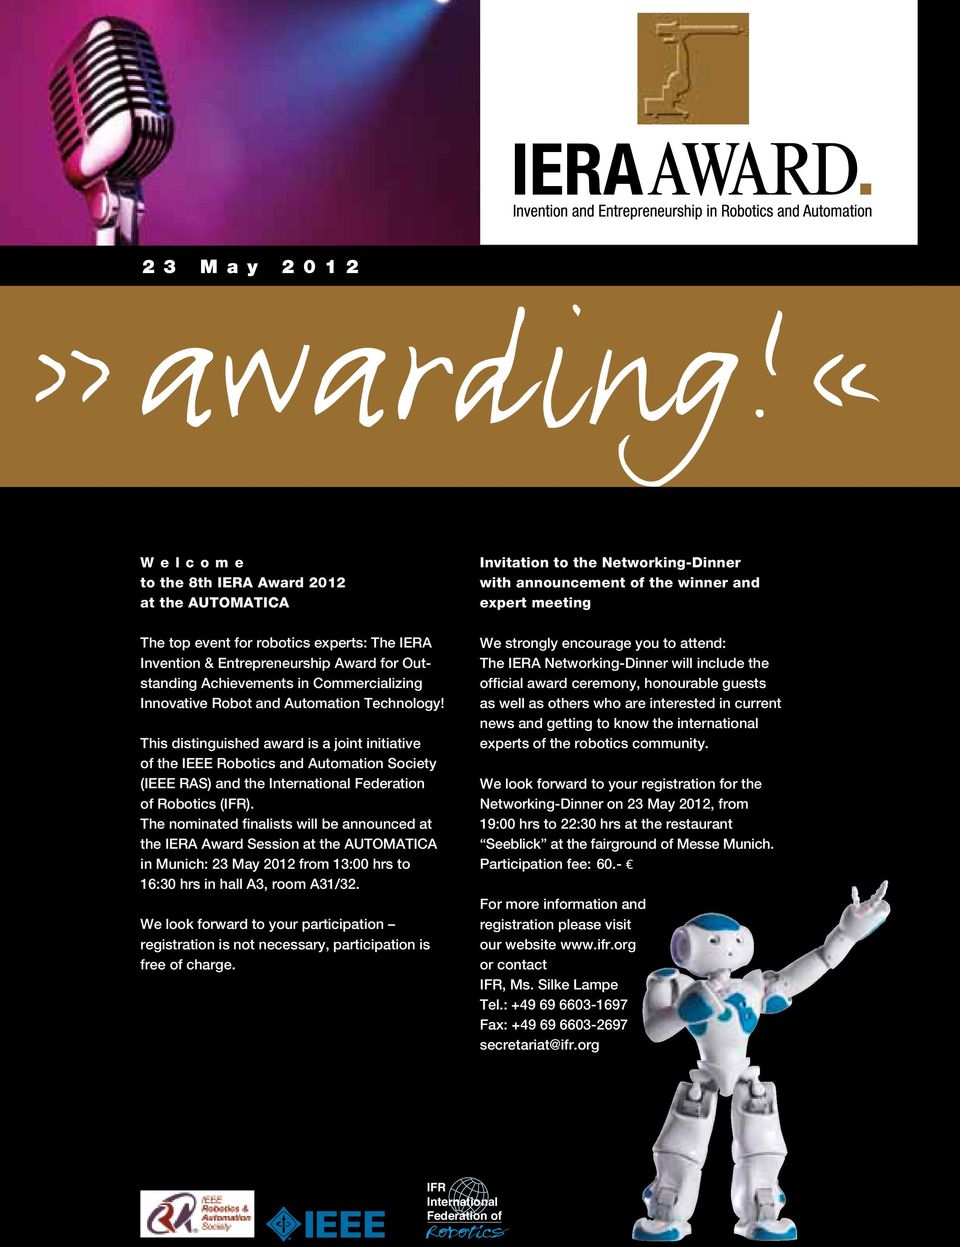 and Automation Technology! This distinguished award is a joint initiative of the IEEE Robotics and Automation Society (IEEE RAS) and the International Federation of Robotics (IFR).